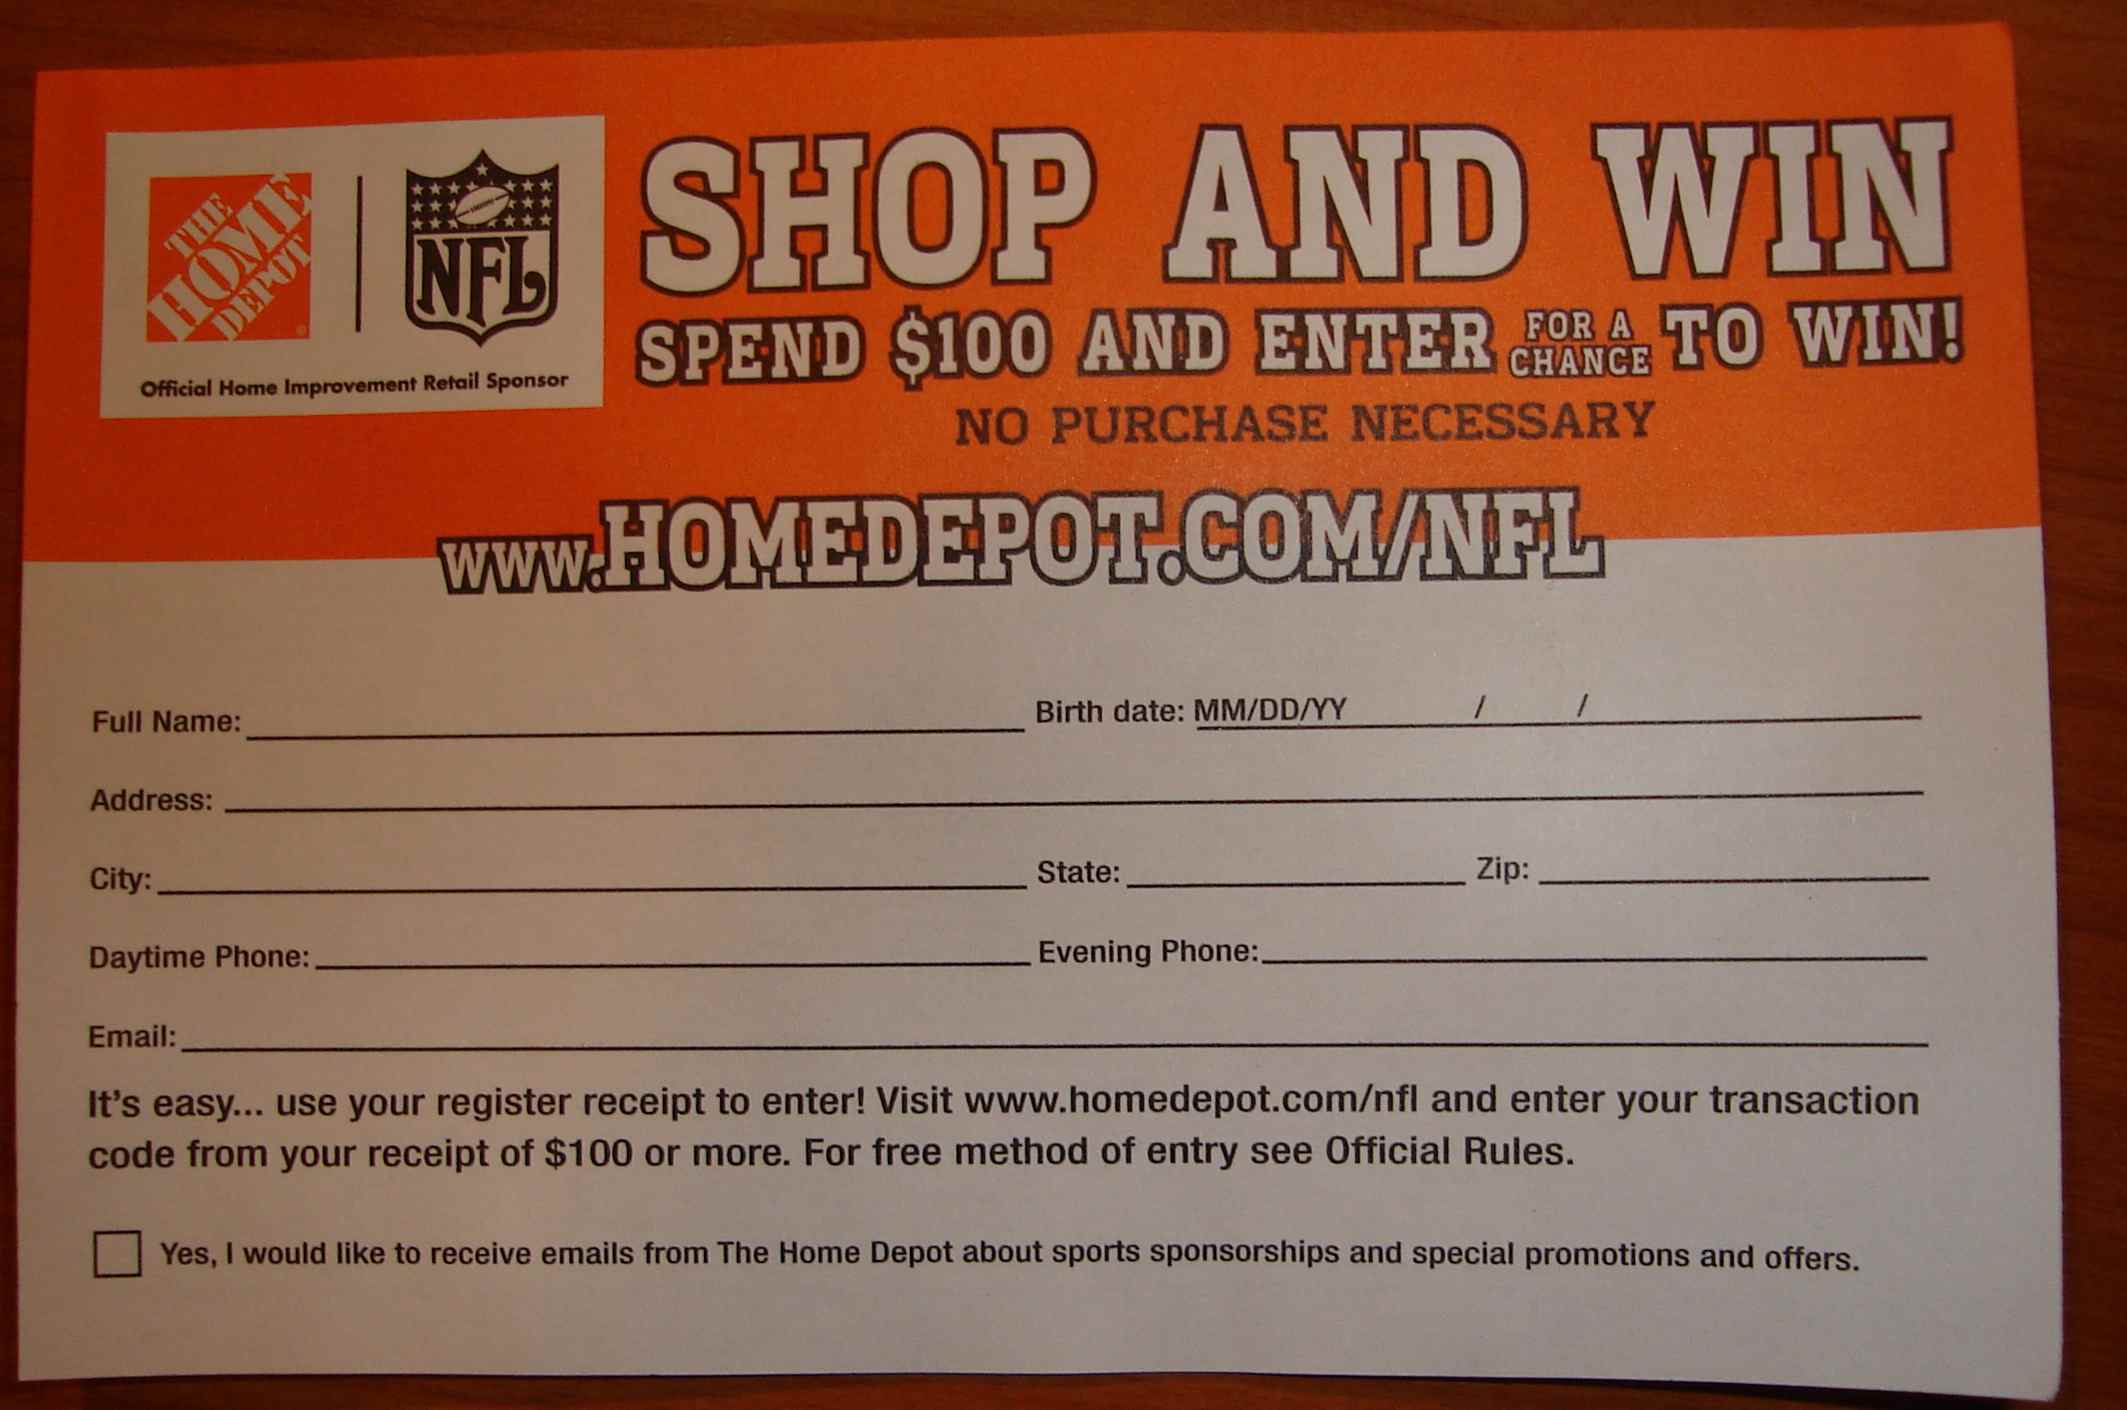 Home Depot Spend $100 and Enter Form